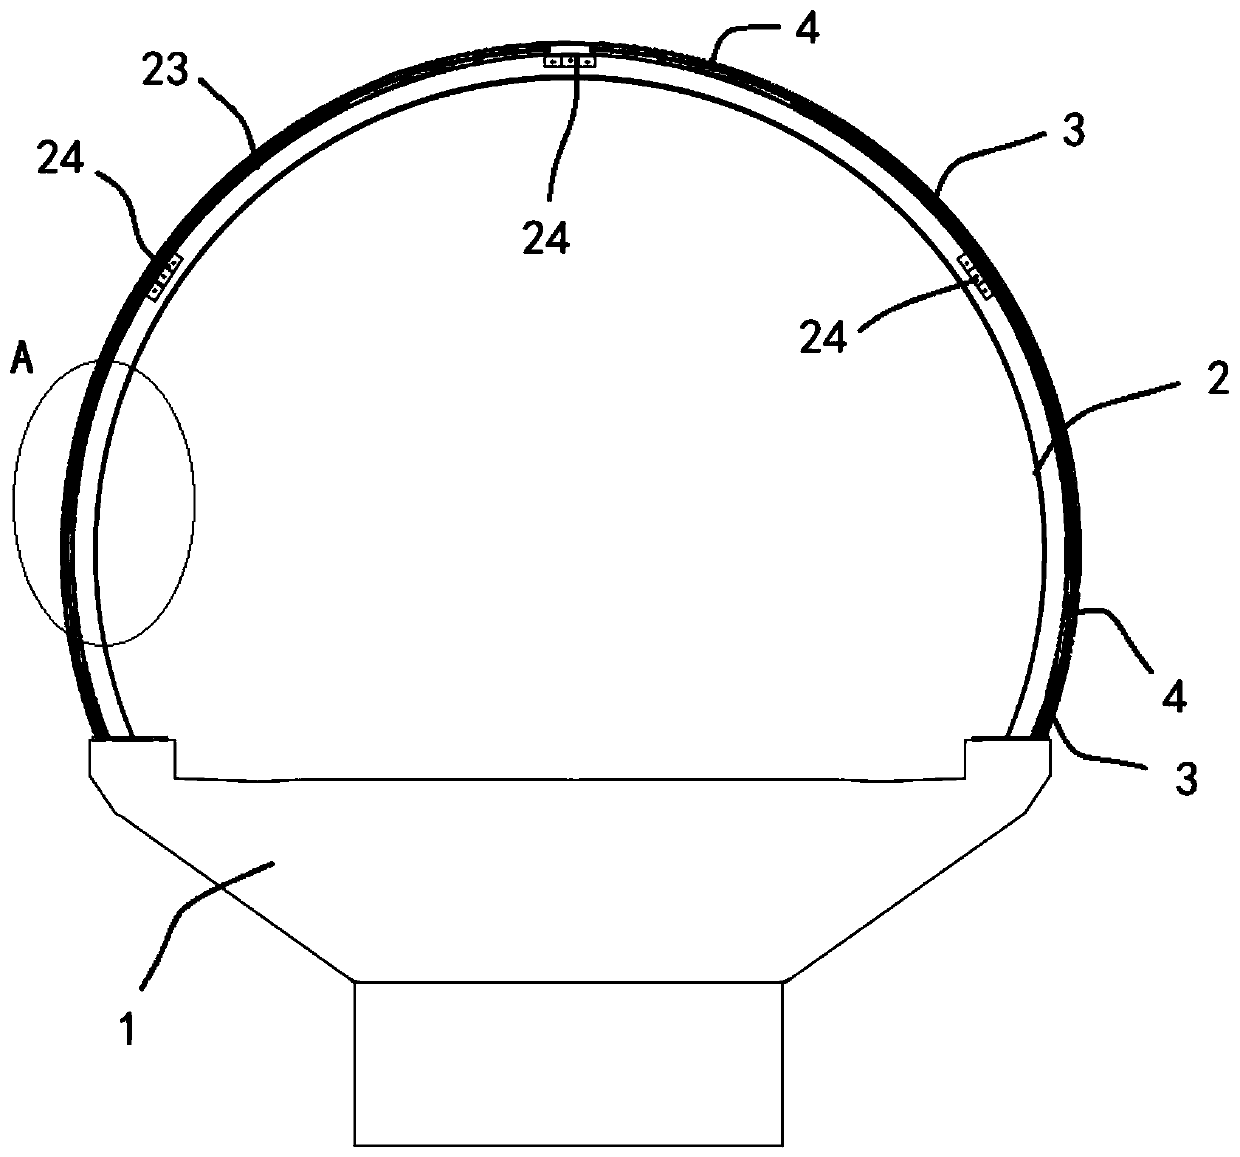 Circular totally-enclosed sound barrier for high-speed rail